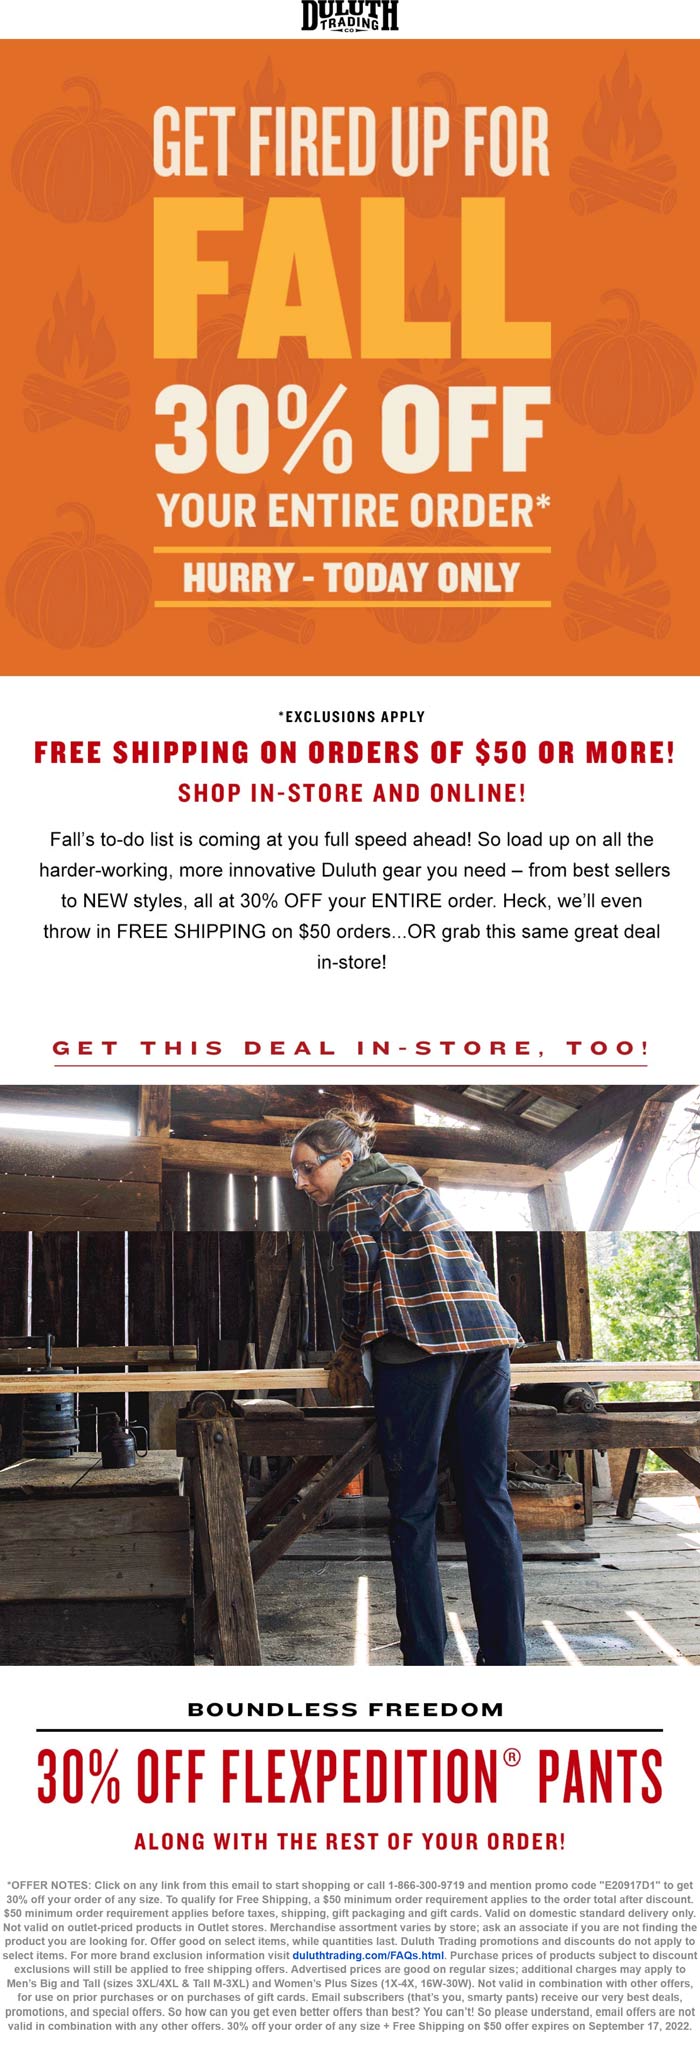 Duluth Trading Company coupons & promo code for [February 2023]